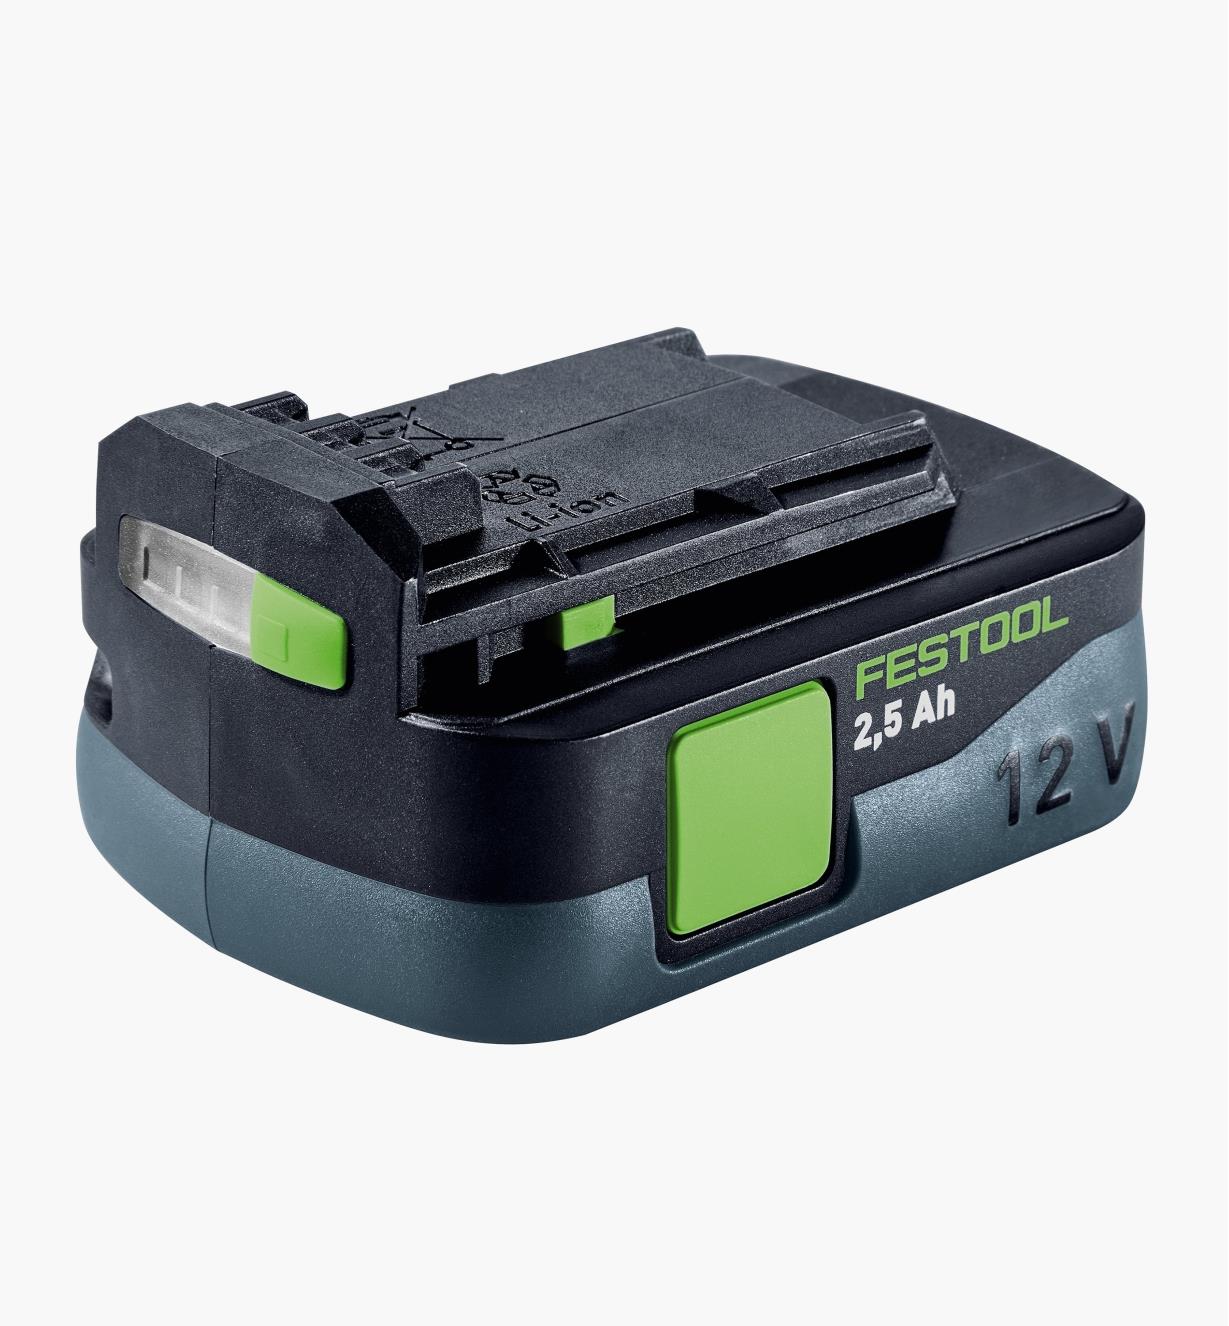 Battery Pack for Festool Cordless Drill CXS 12